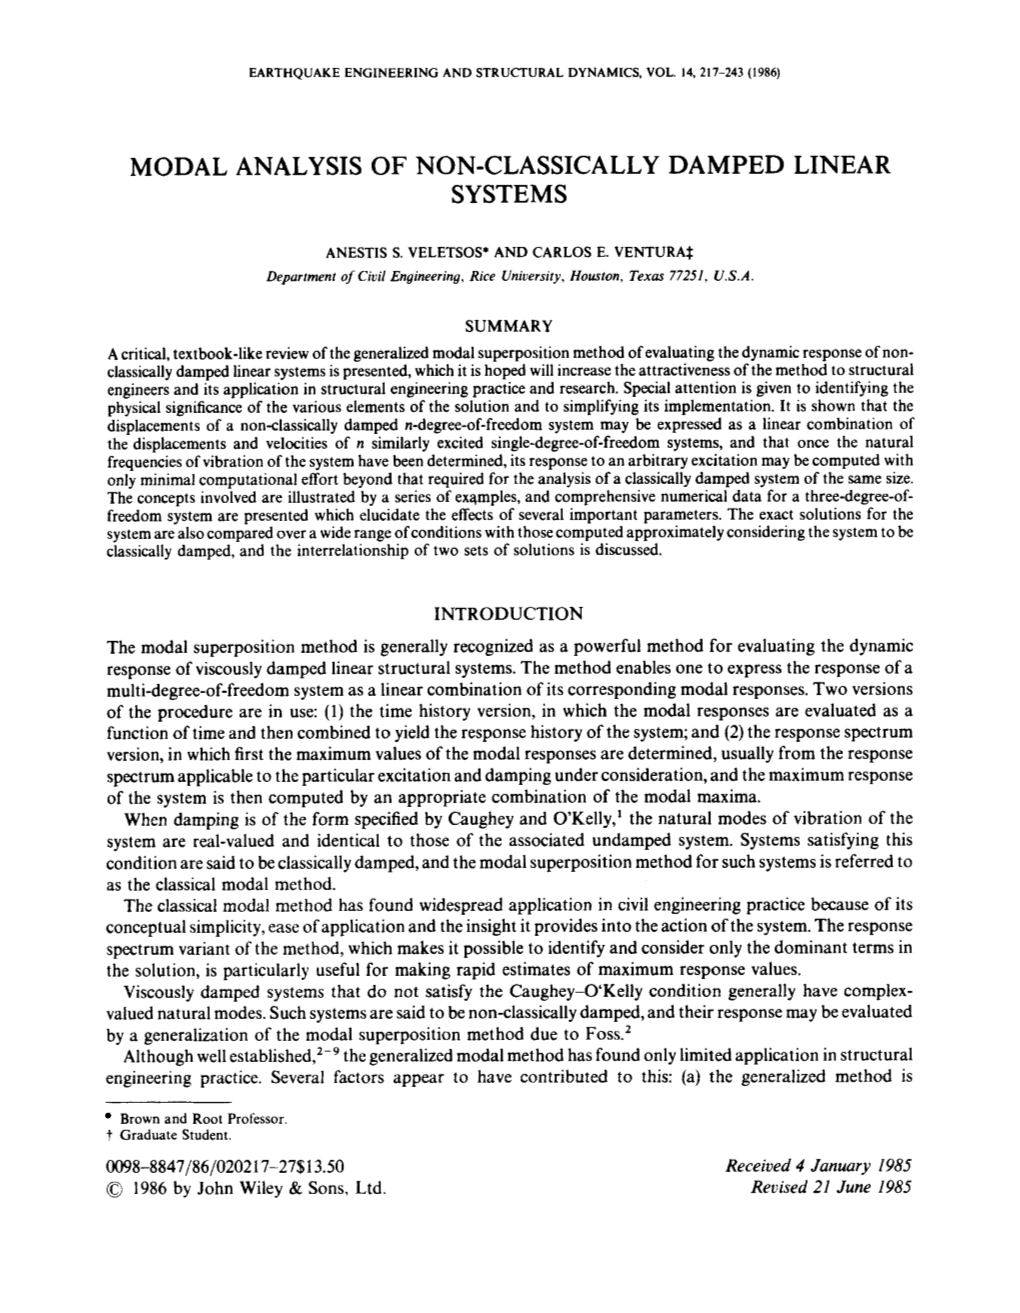 Modal Analysis of Non-Classically Damped Linear Systems